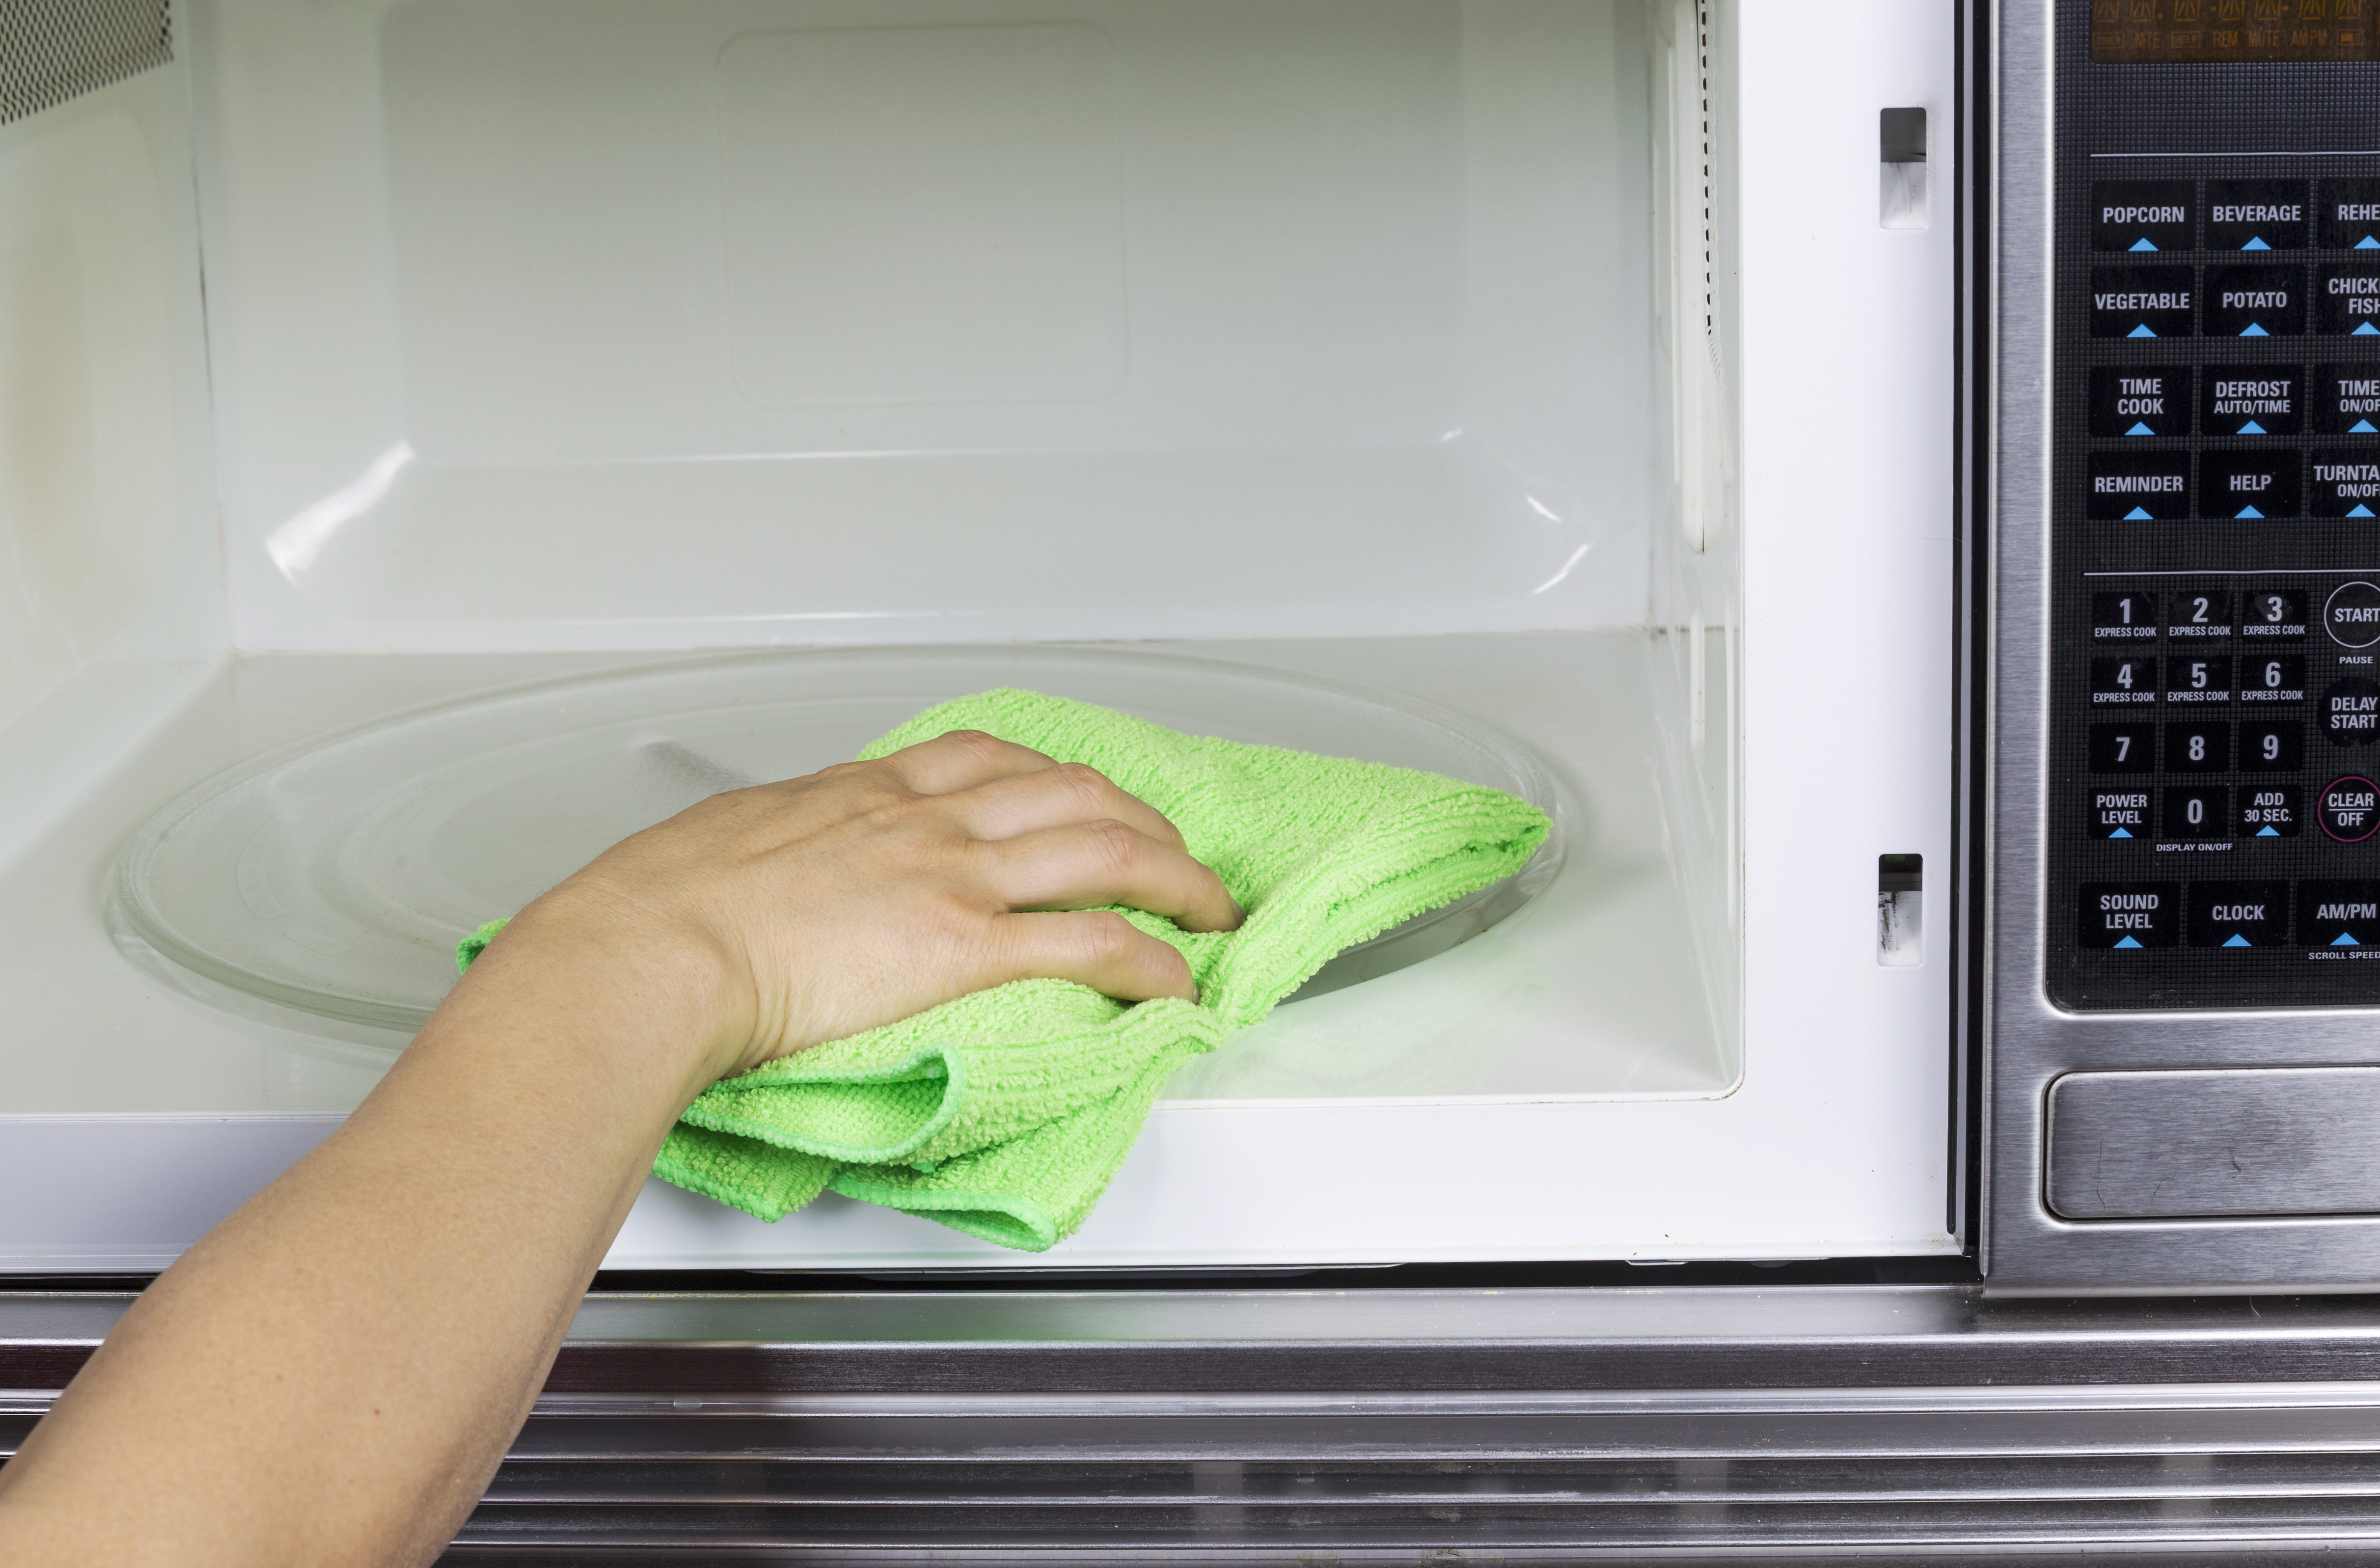 How To Clean A Smelly Microwave With Common Kitchen Products